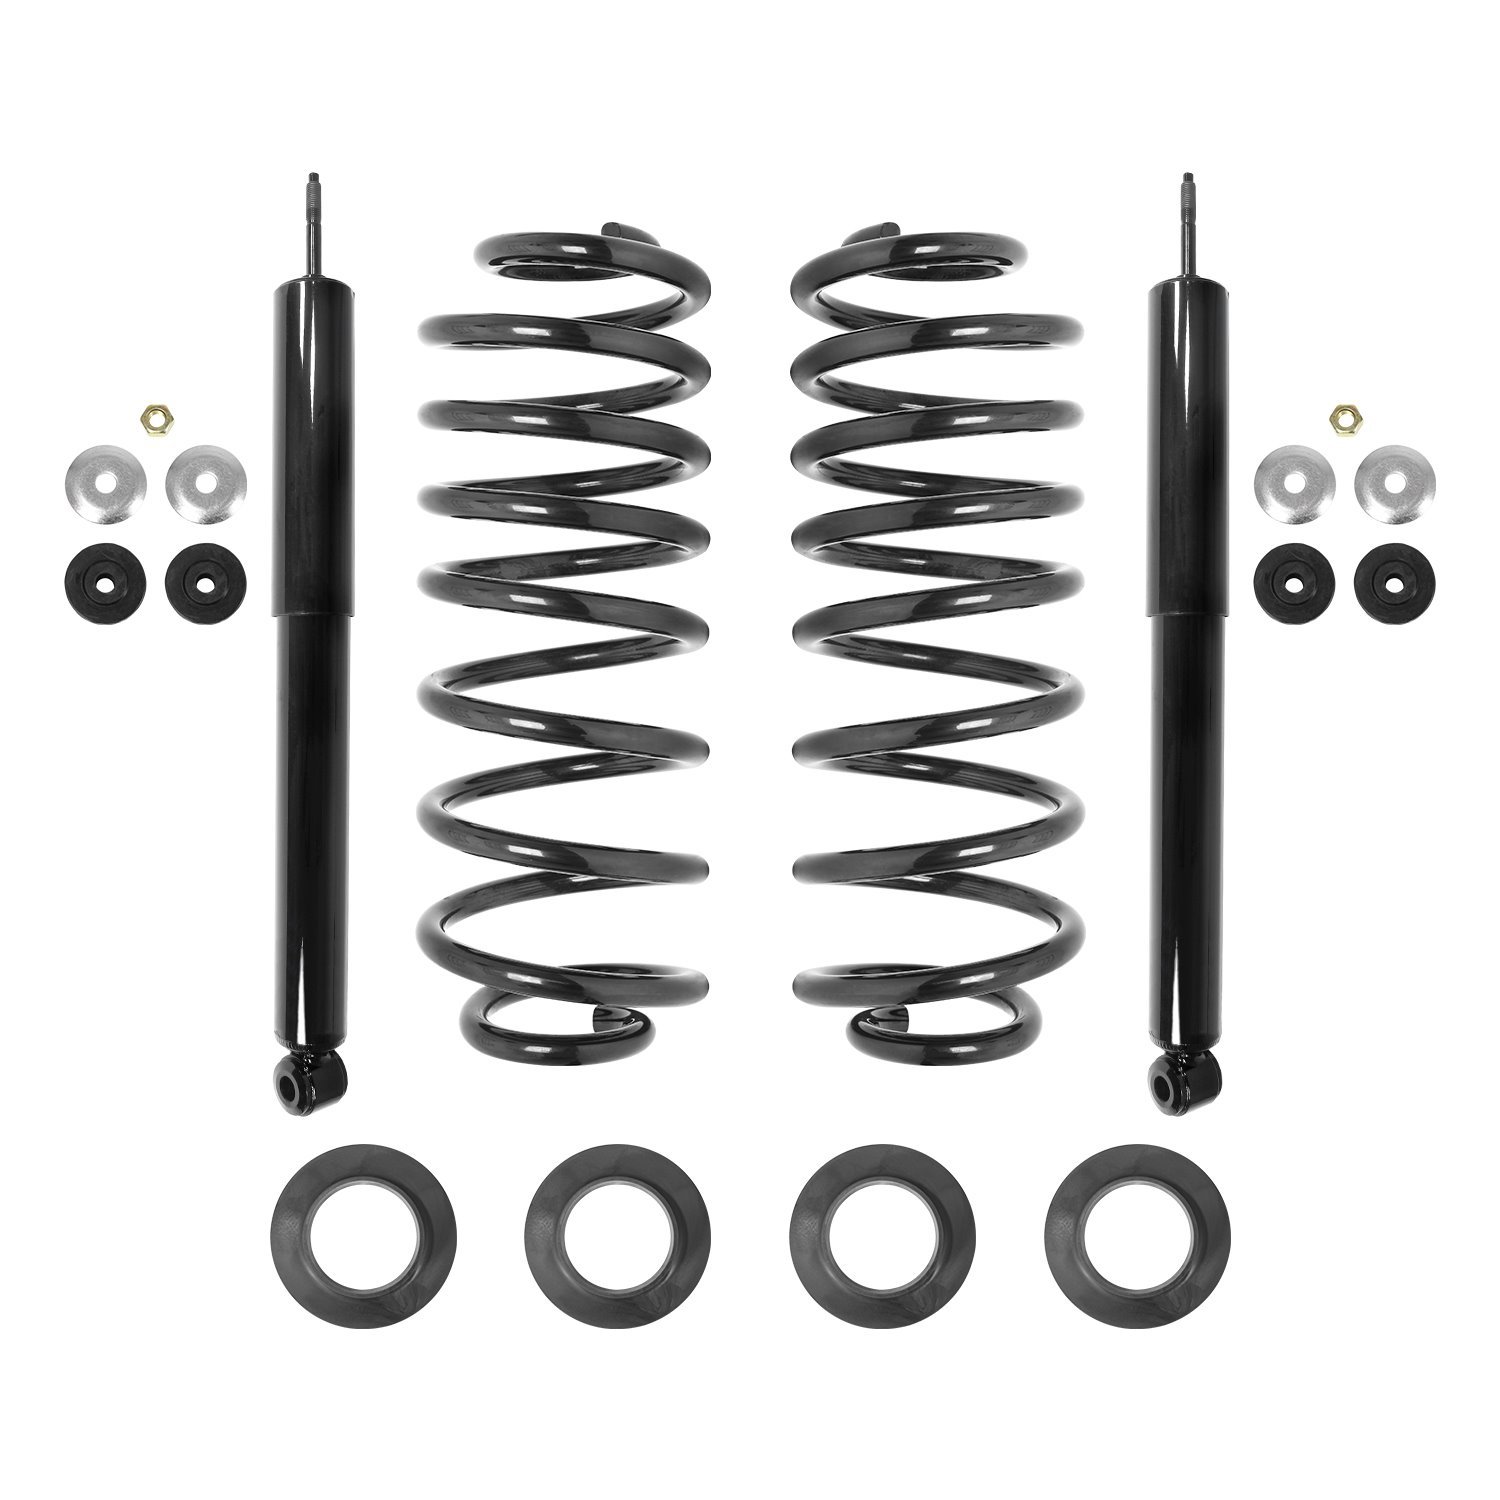 65993c Air Spring To Coil Spring Conversion Kit Fits Select Ford Crown Victoria, Lincoln Town Car, Mercury Grand Marquis